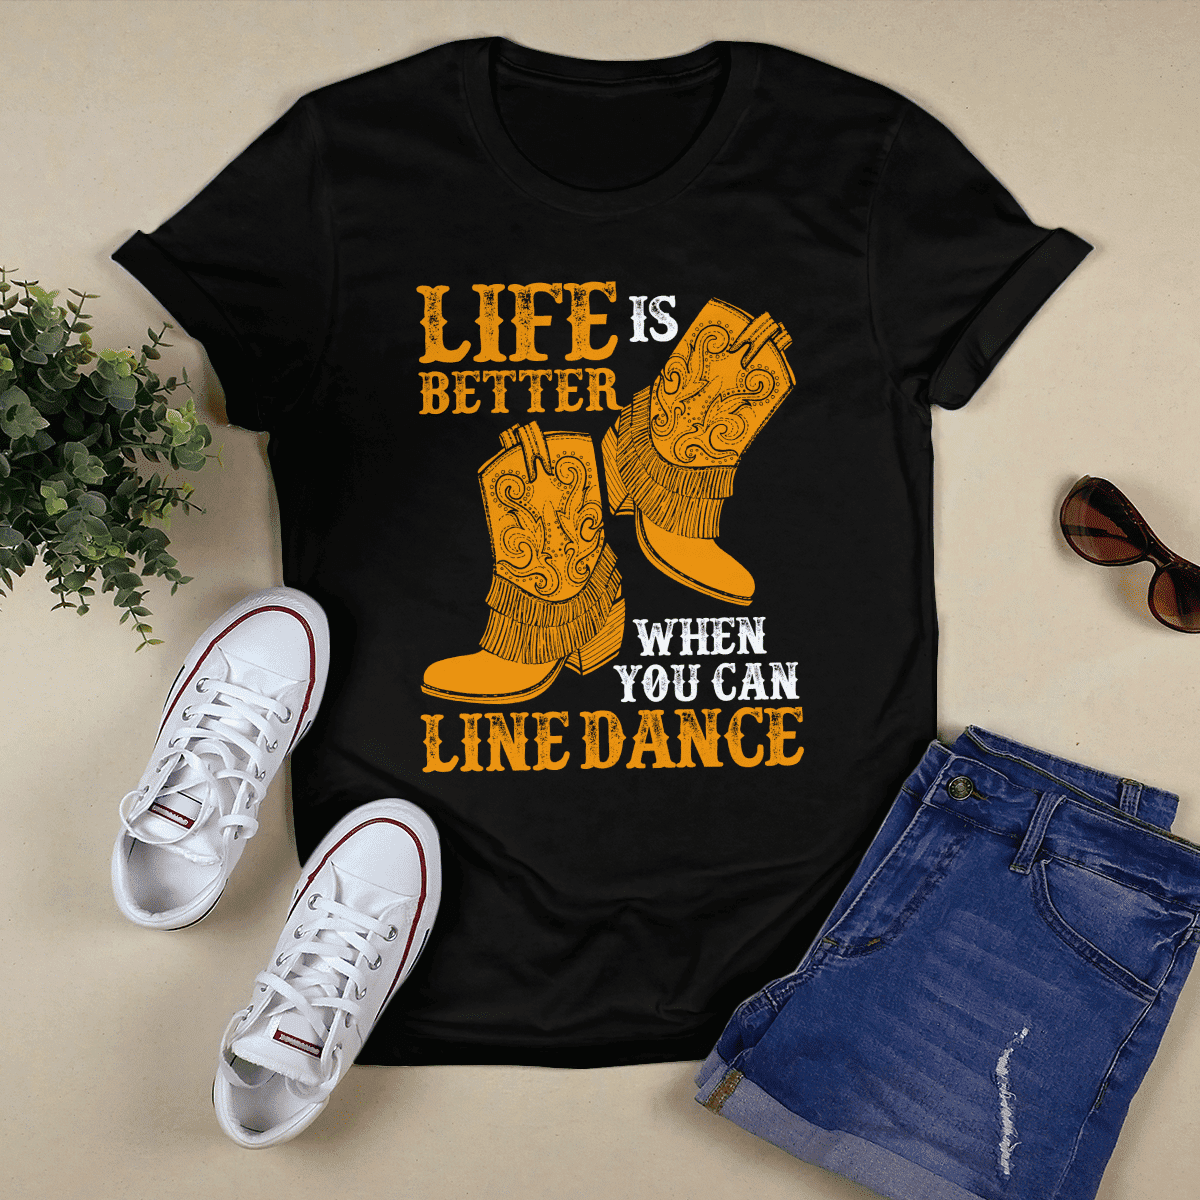 Life is better when you can linedance - Linedancing shoes, gift for linedancing people